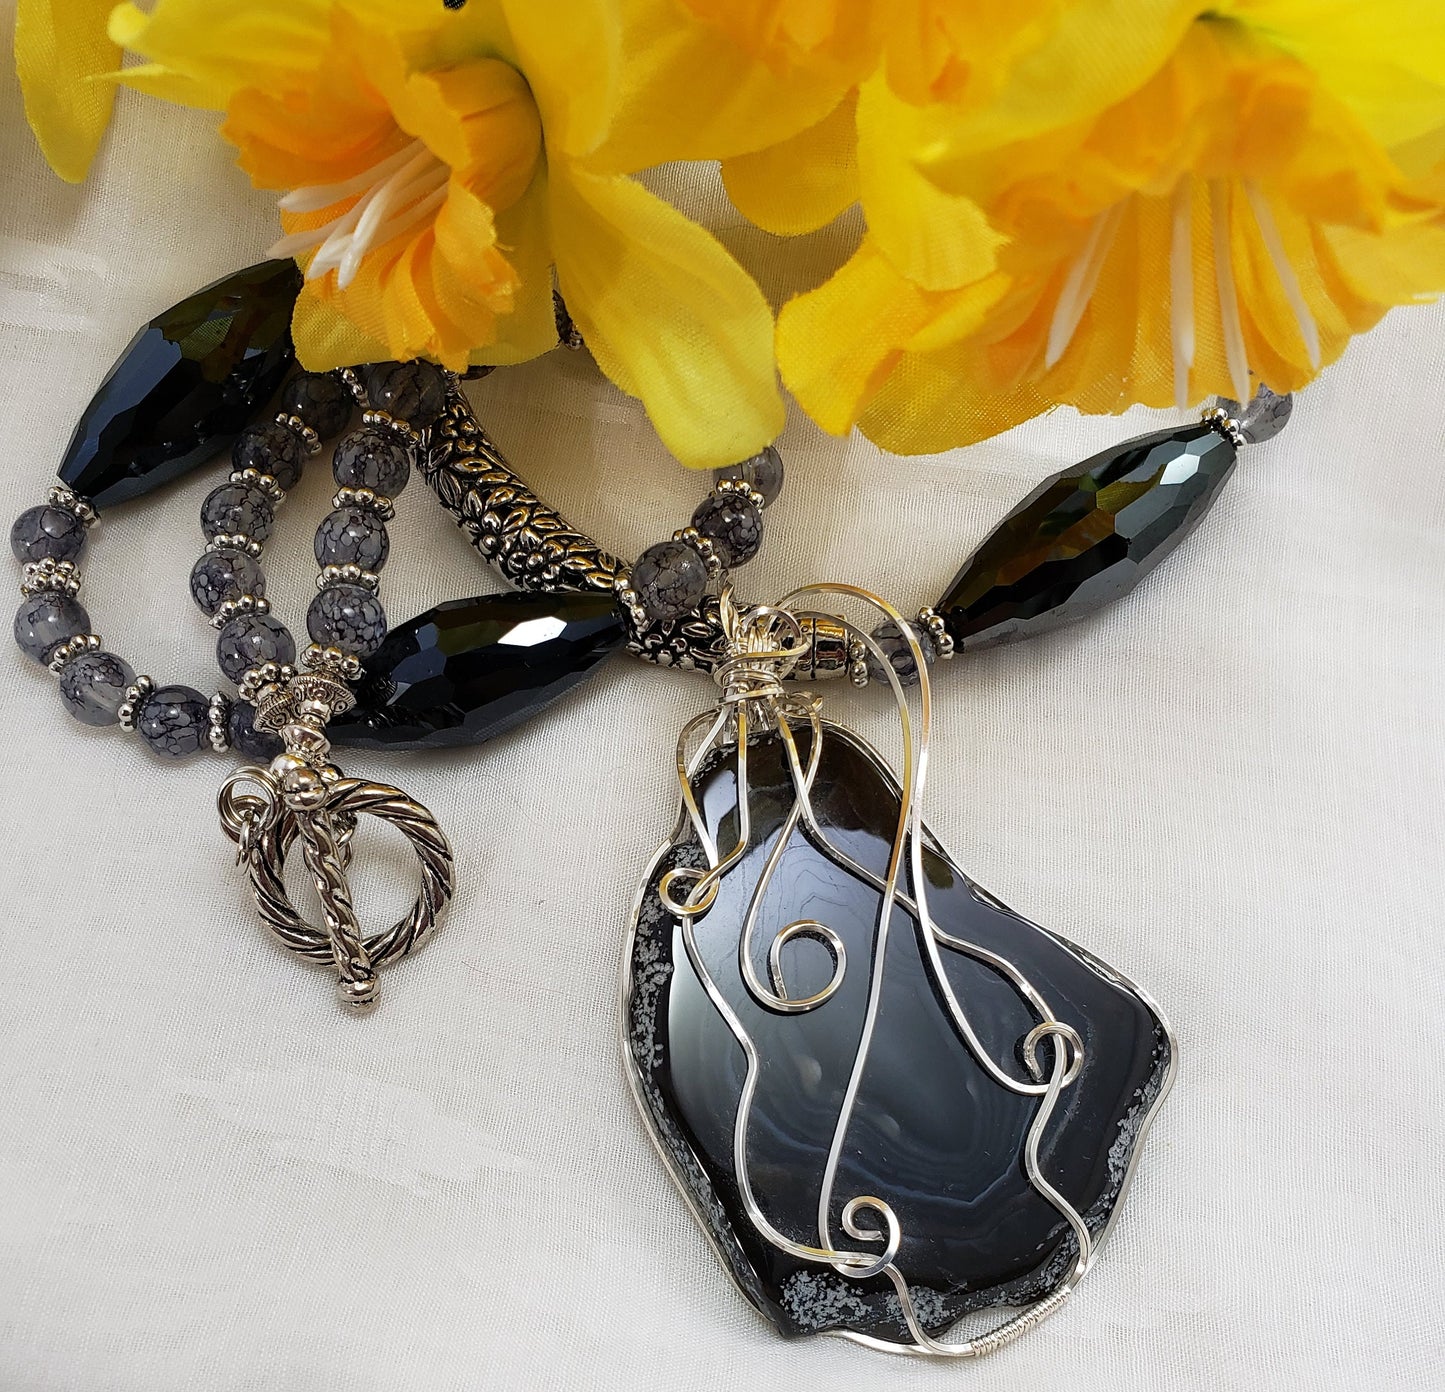 Wire Wrapped Black Veins Agate Pendant On Beaded Necklace